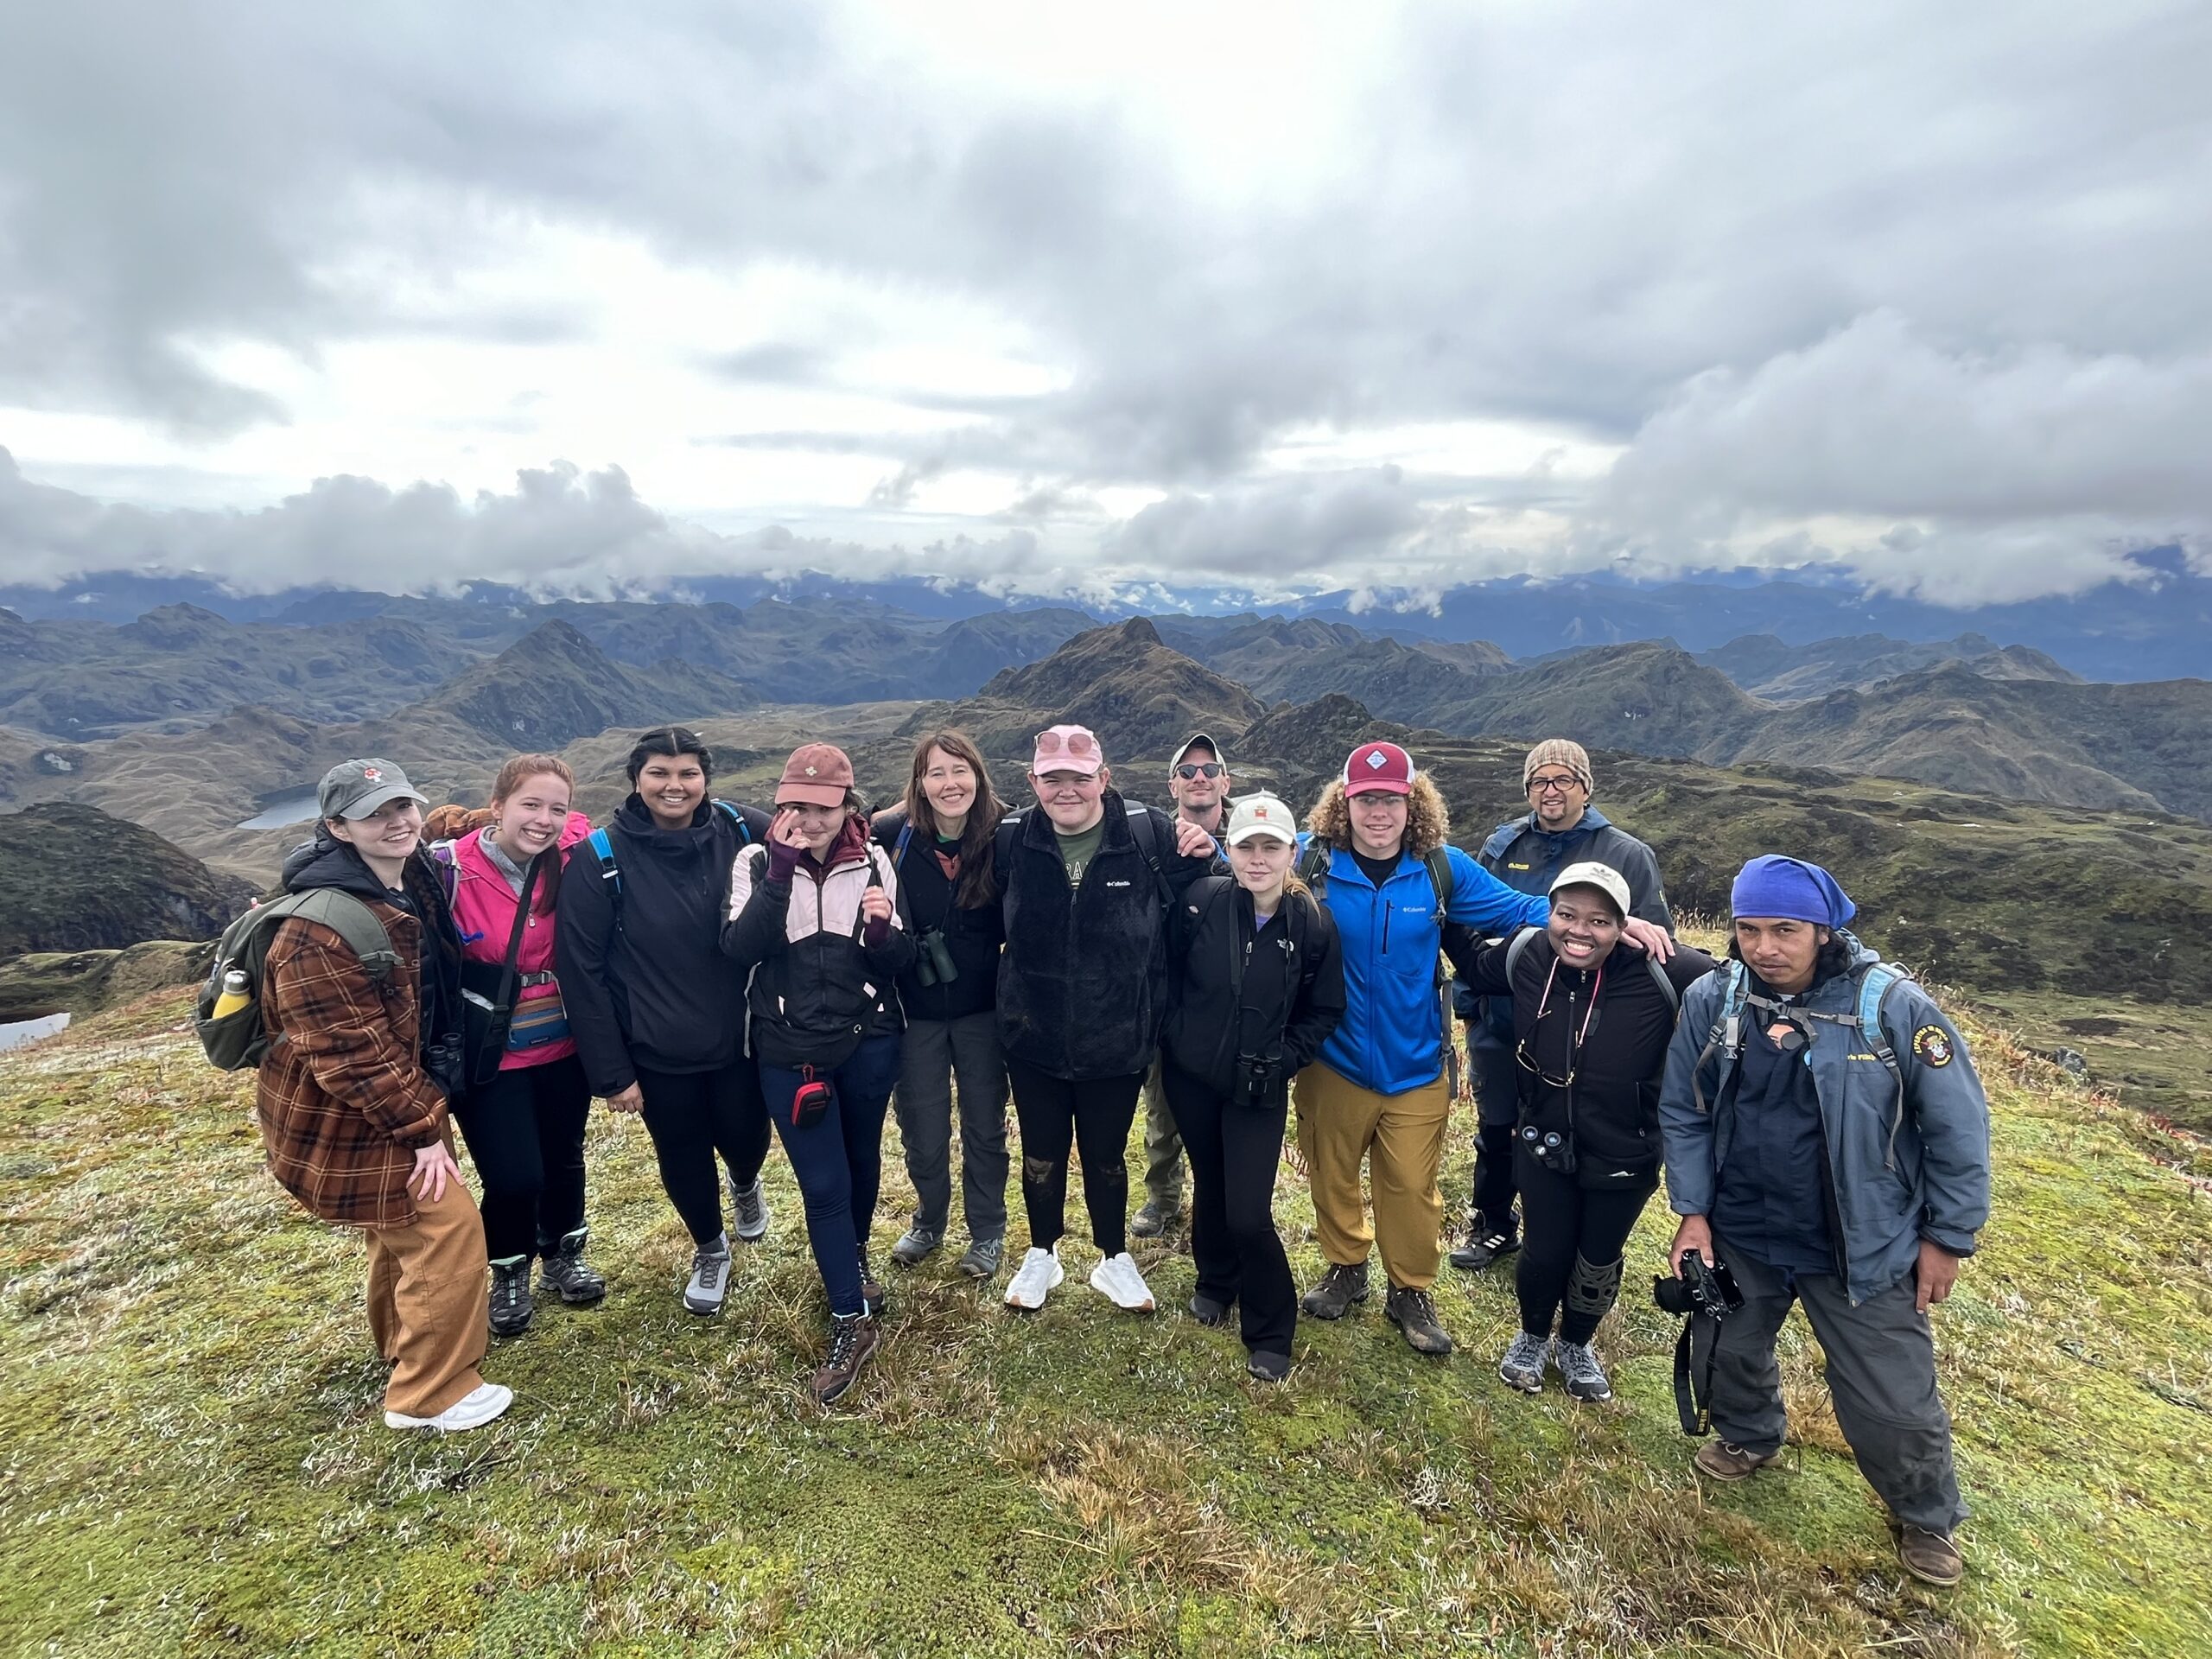 a group of students pose for the camera. there is a mountain range behind them.